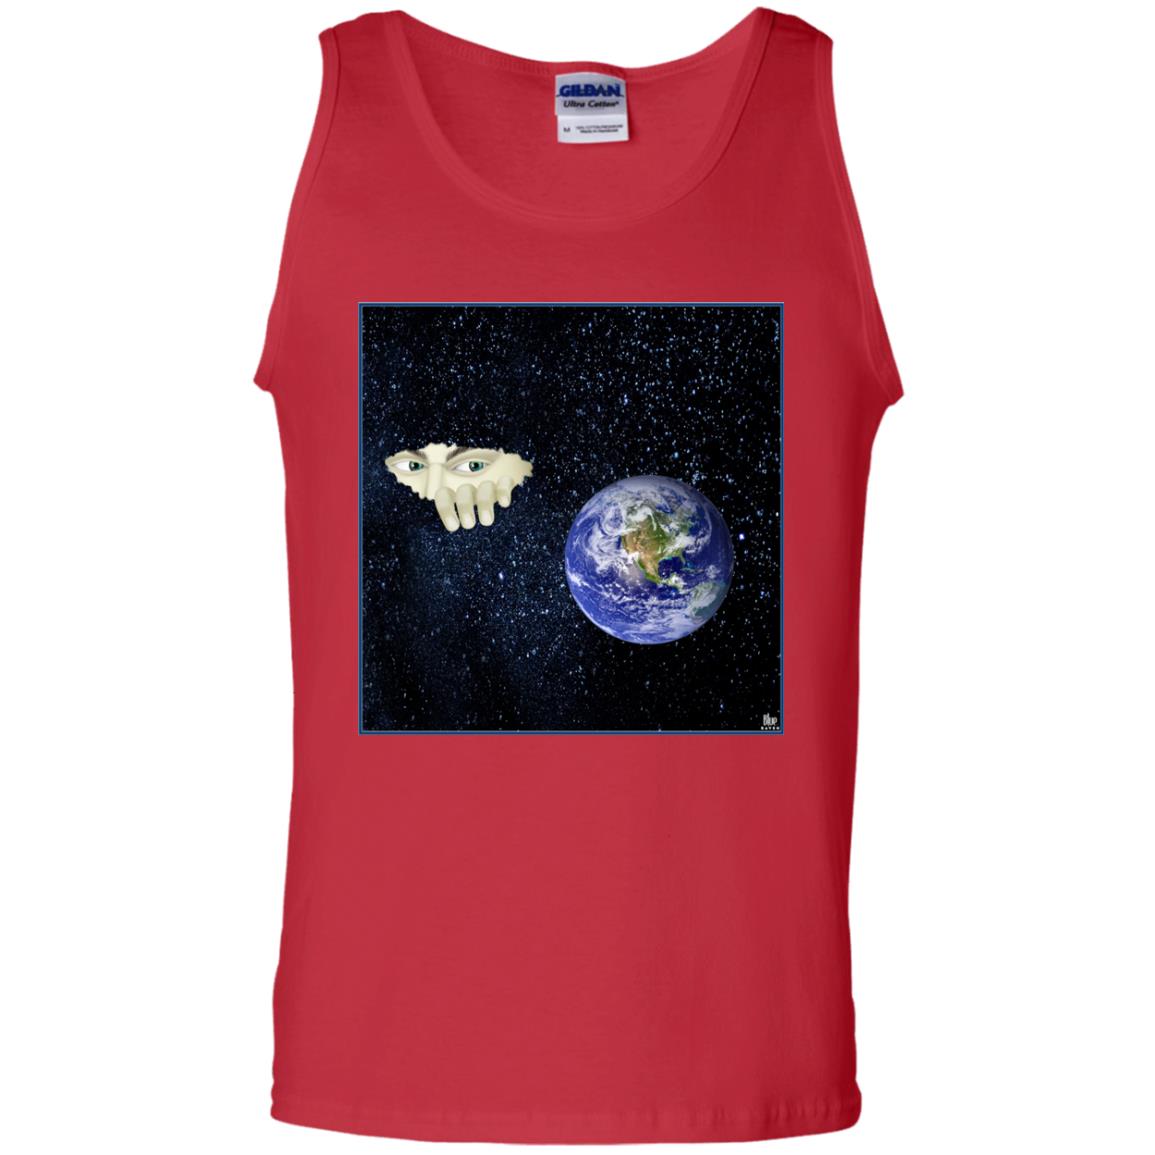 SOMEWHERE OUT THERE - Men's Tank Top